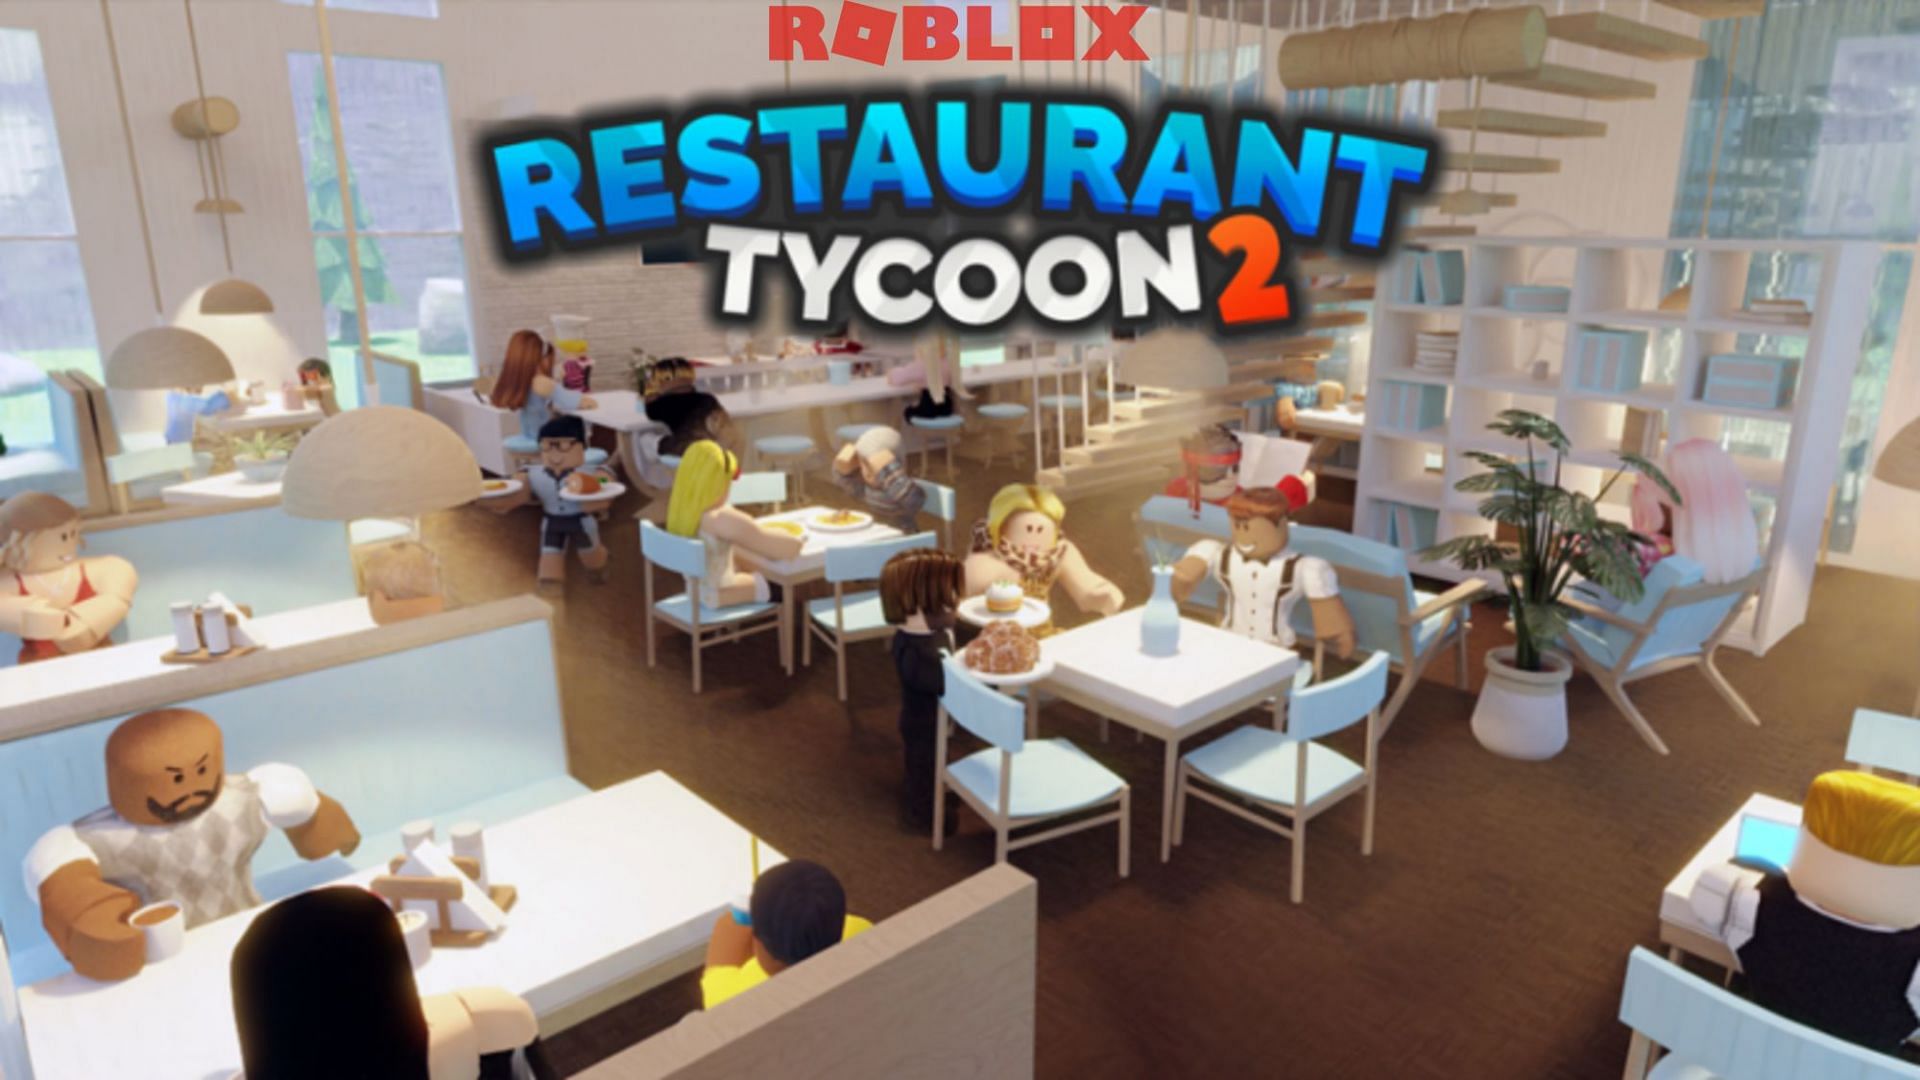 Restaurant Tycoon 2 codes in Roblox: Free Diamonds, Cash, and more (April 2022)